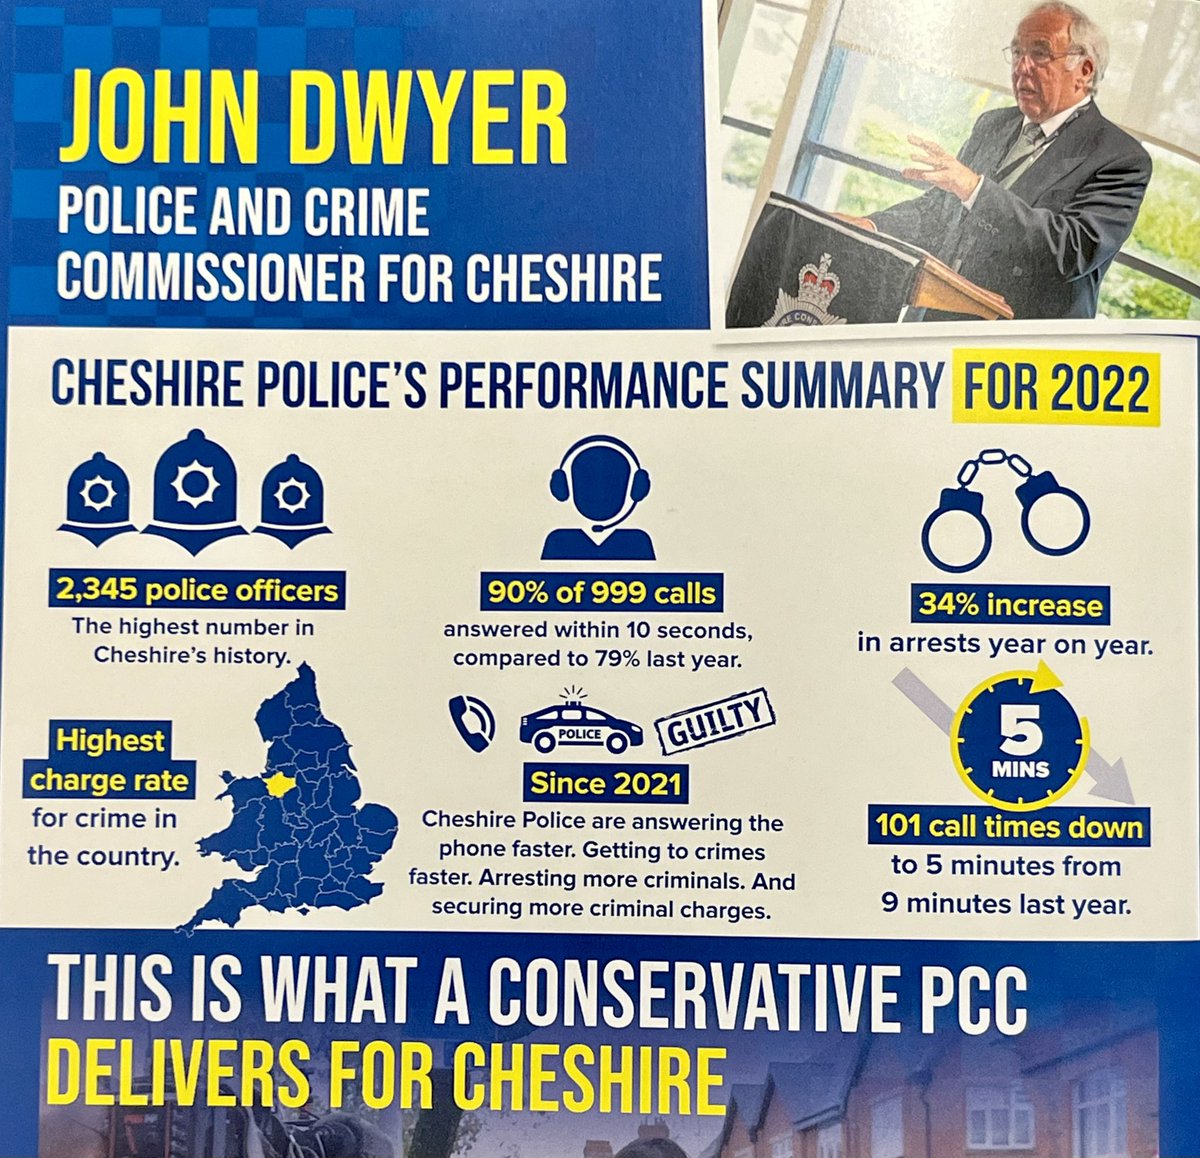 Great to see the real difference that @CheshirePCC, John Dwyer, is making to the county. More police officers. More arrests. Highest charge rate for crime in the country. #PositiveNews